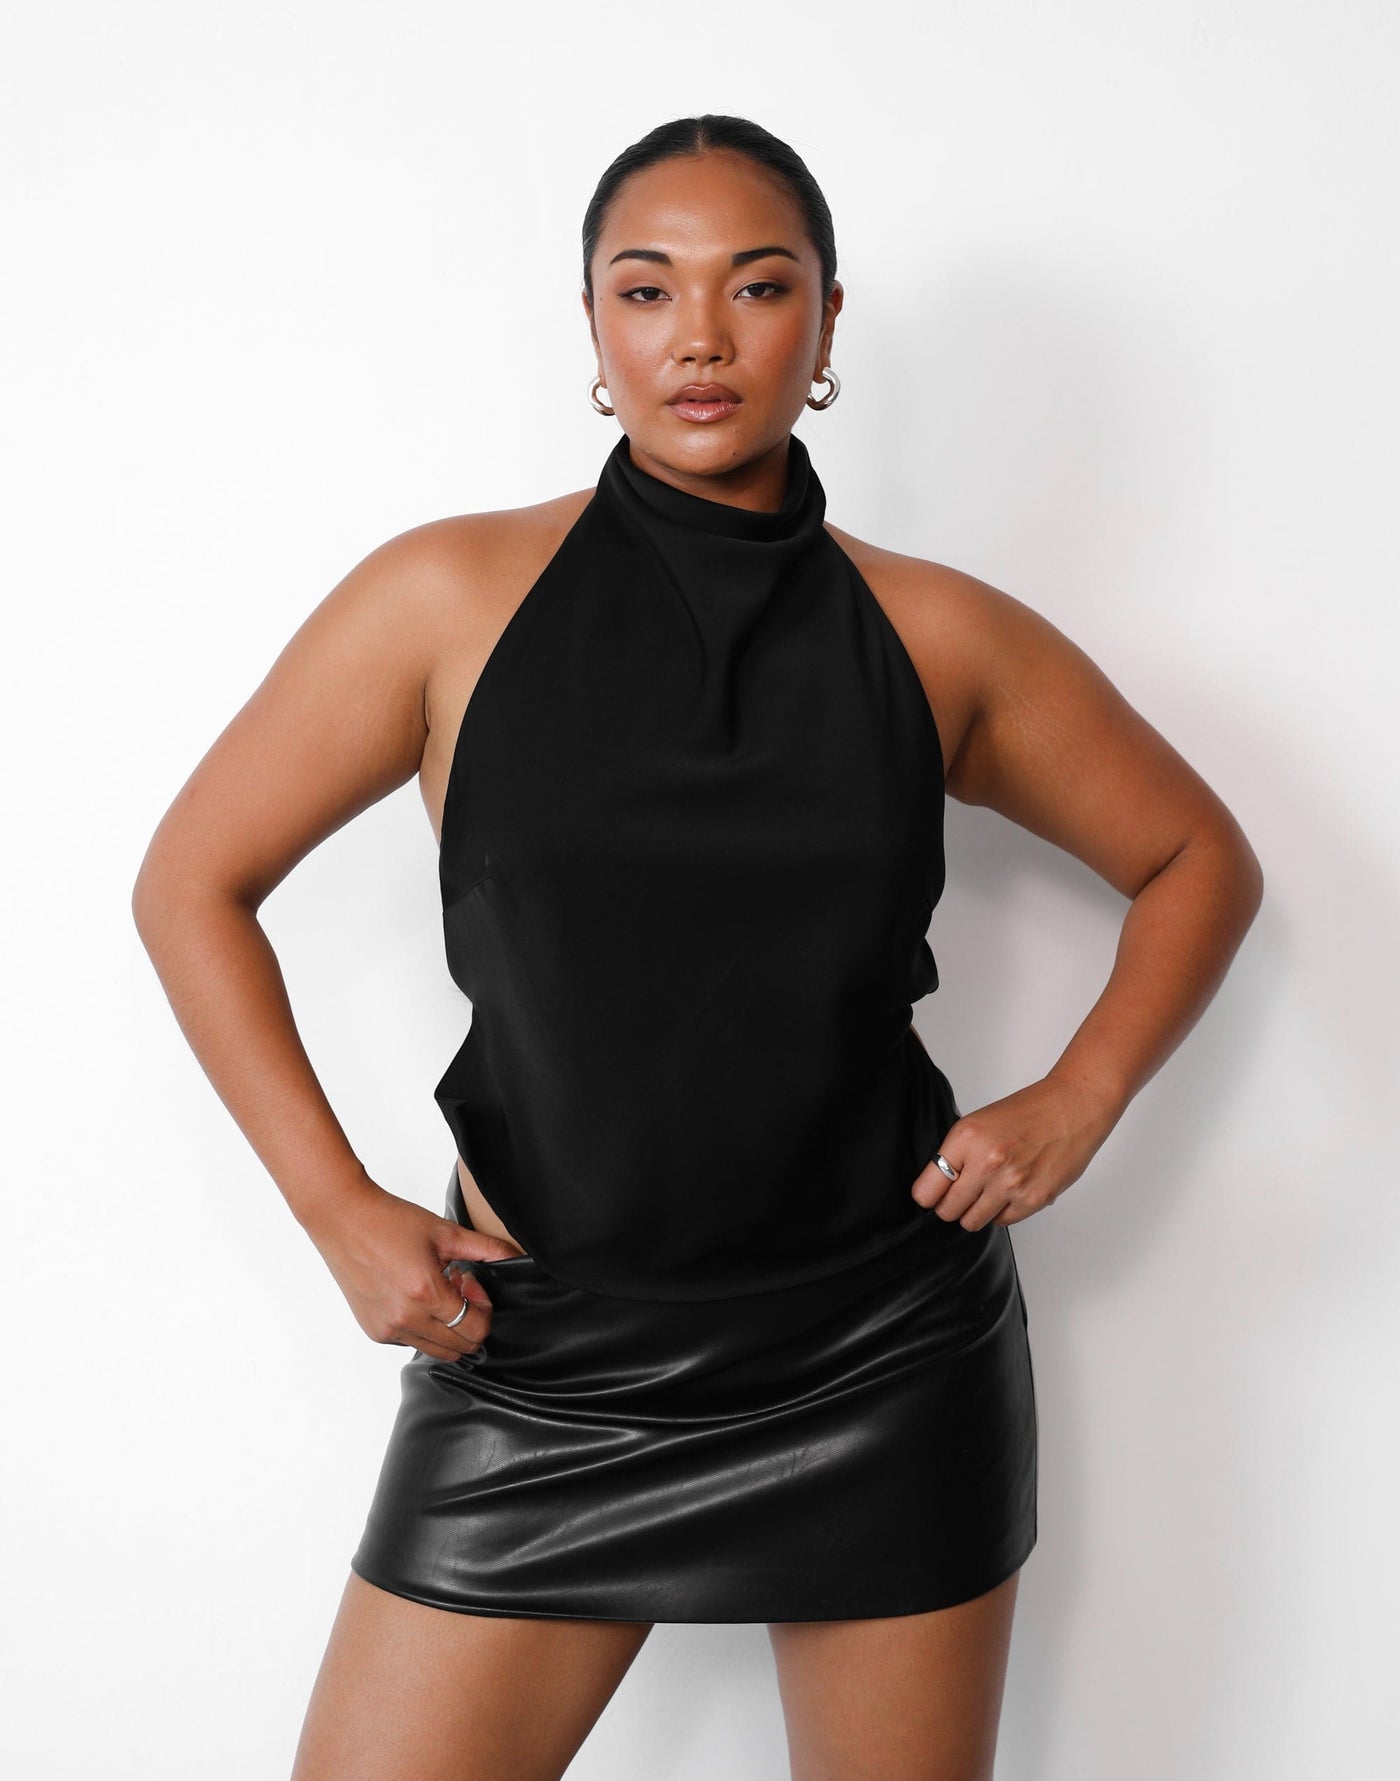 Clara Top (Black) | Charcoal Clothing Exclusive - High Neck Satin Backless Top - Women's Top - Charcoal Clothing